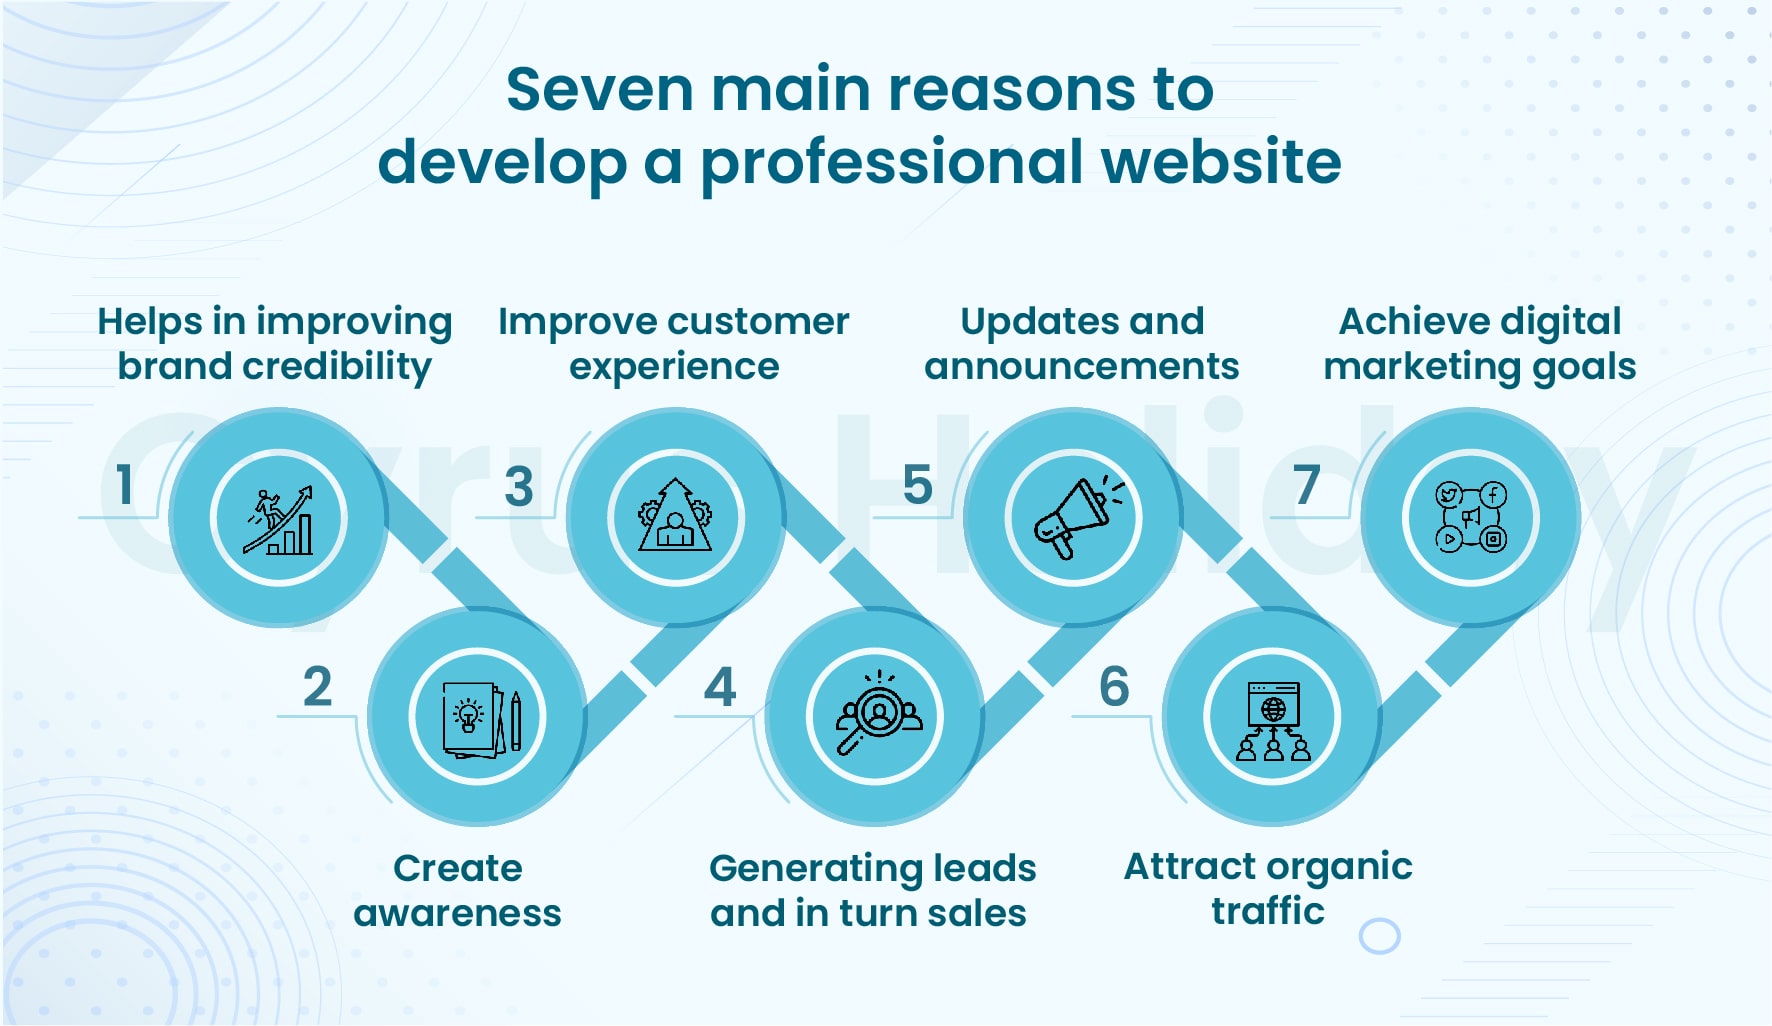 Seven main reasons to develop a professional website